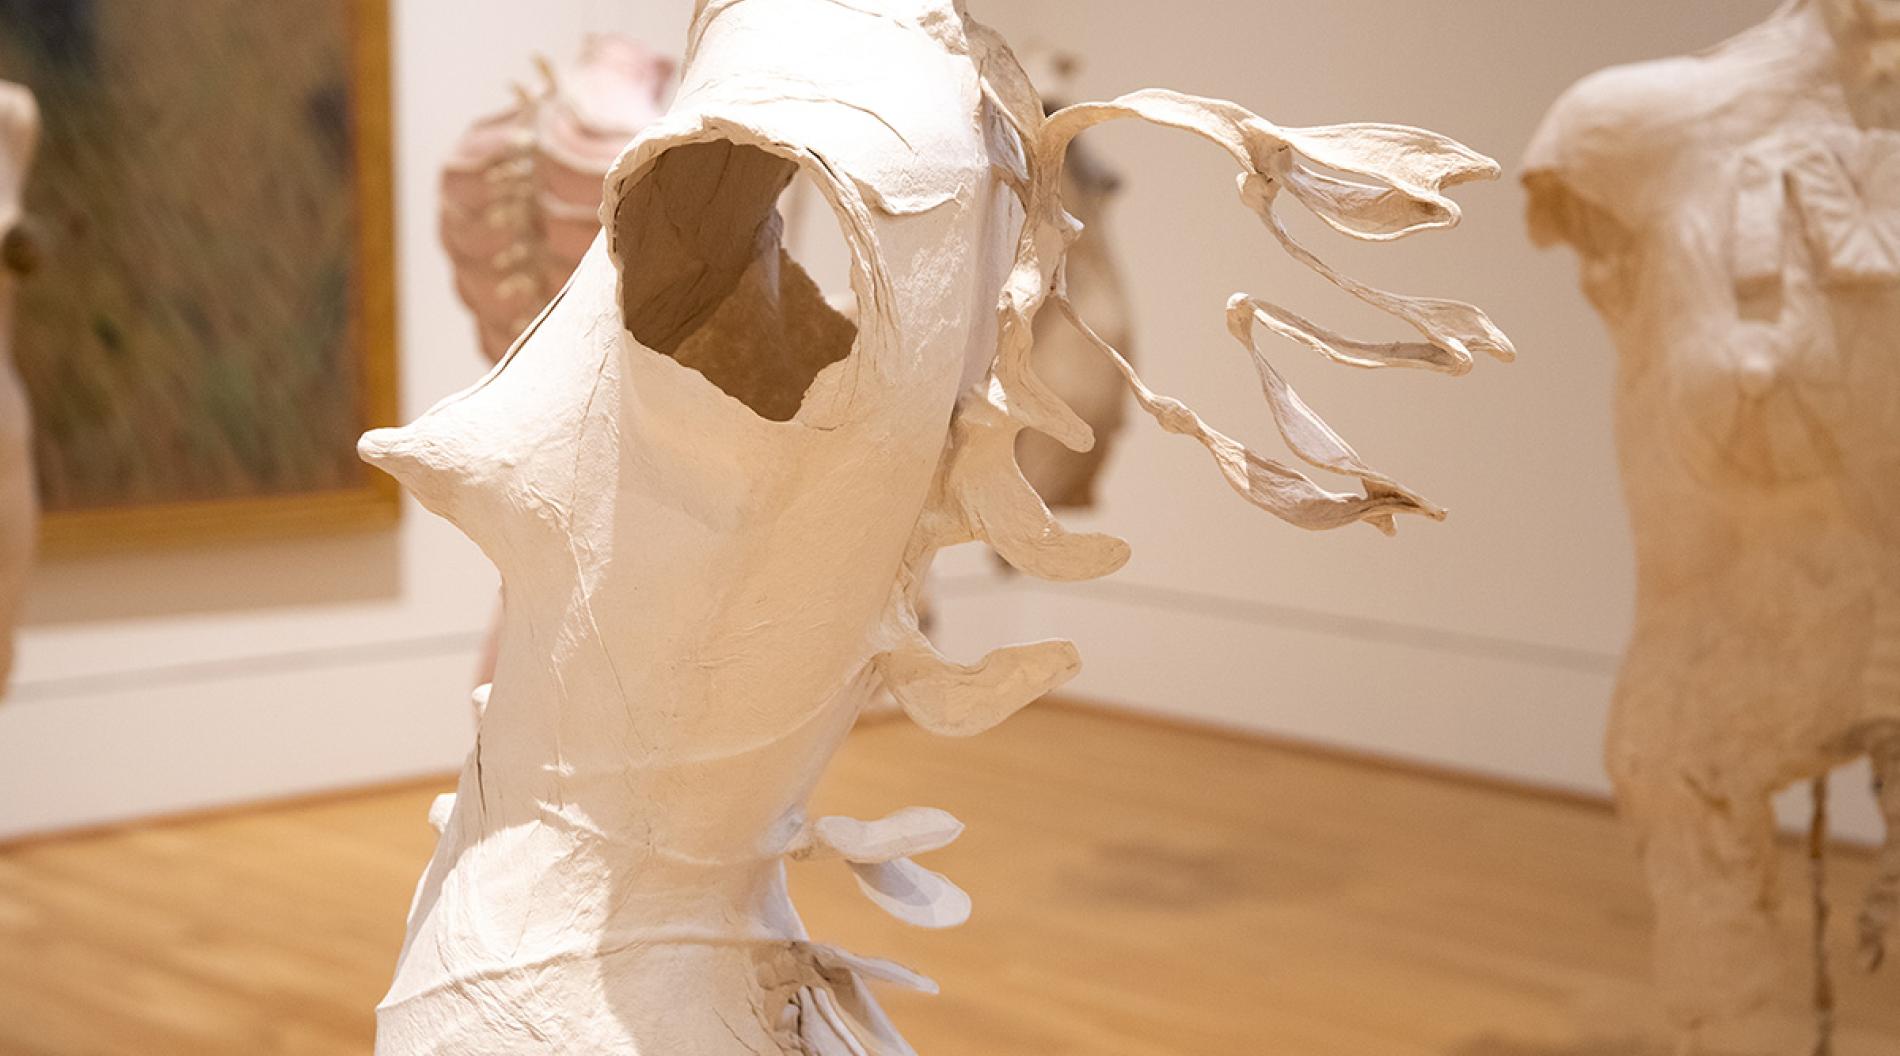 Photograph of paper sculptures of abstract female torsos hanging in gallery